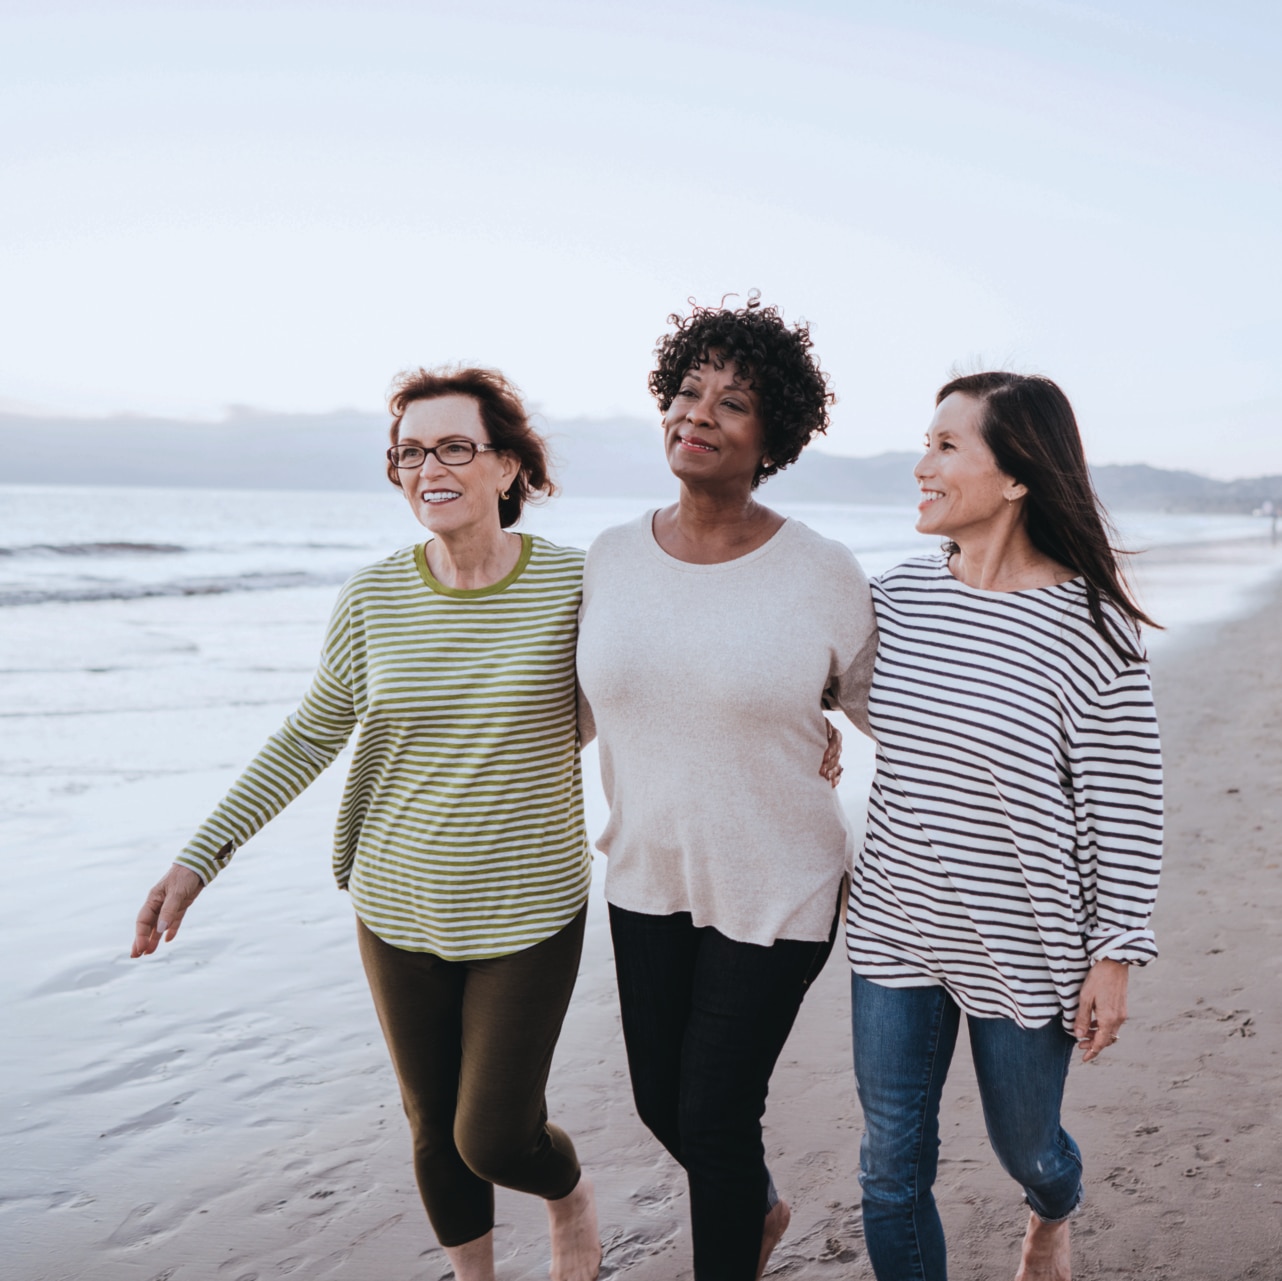 Three friends walking on the beach, appearing to be happy.